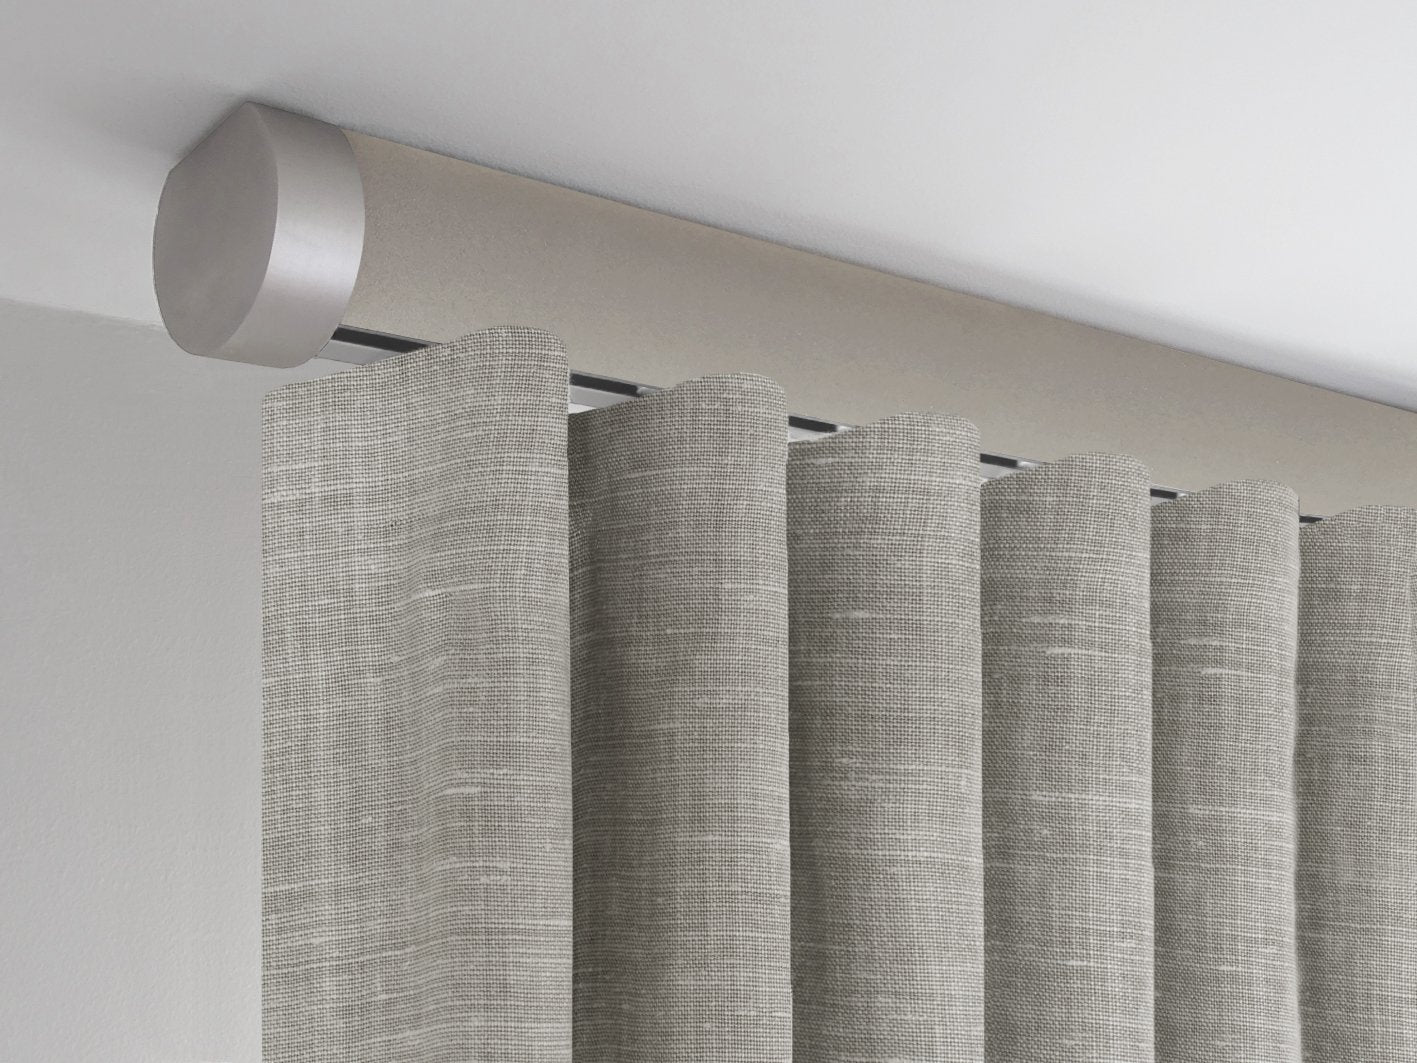 Flush ceiling fix curtain pole in fawn beige by Walcot House